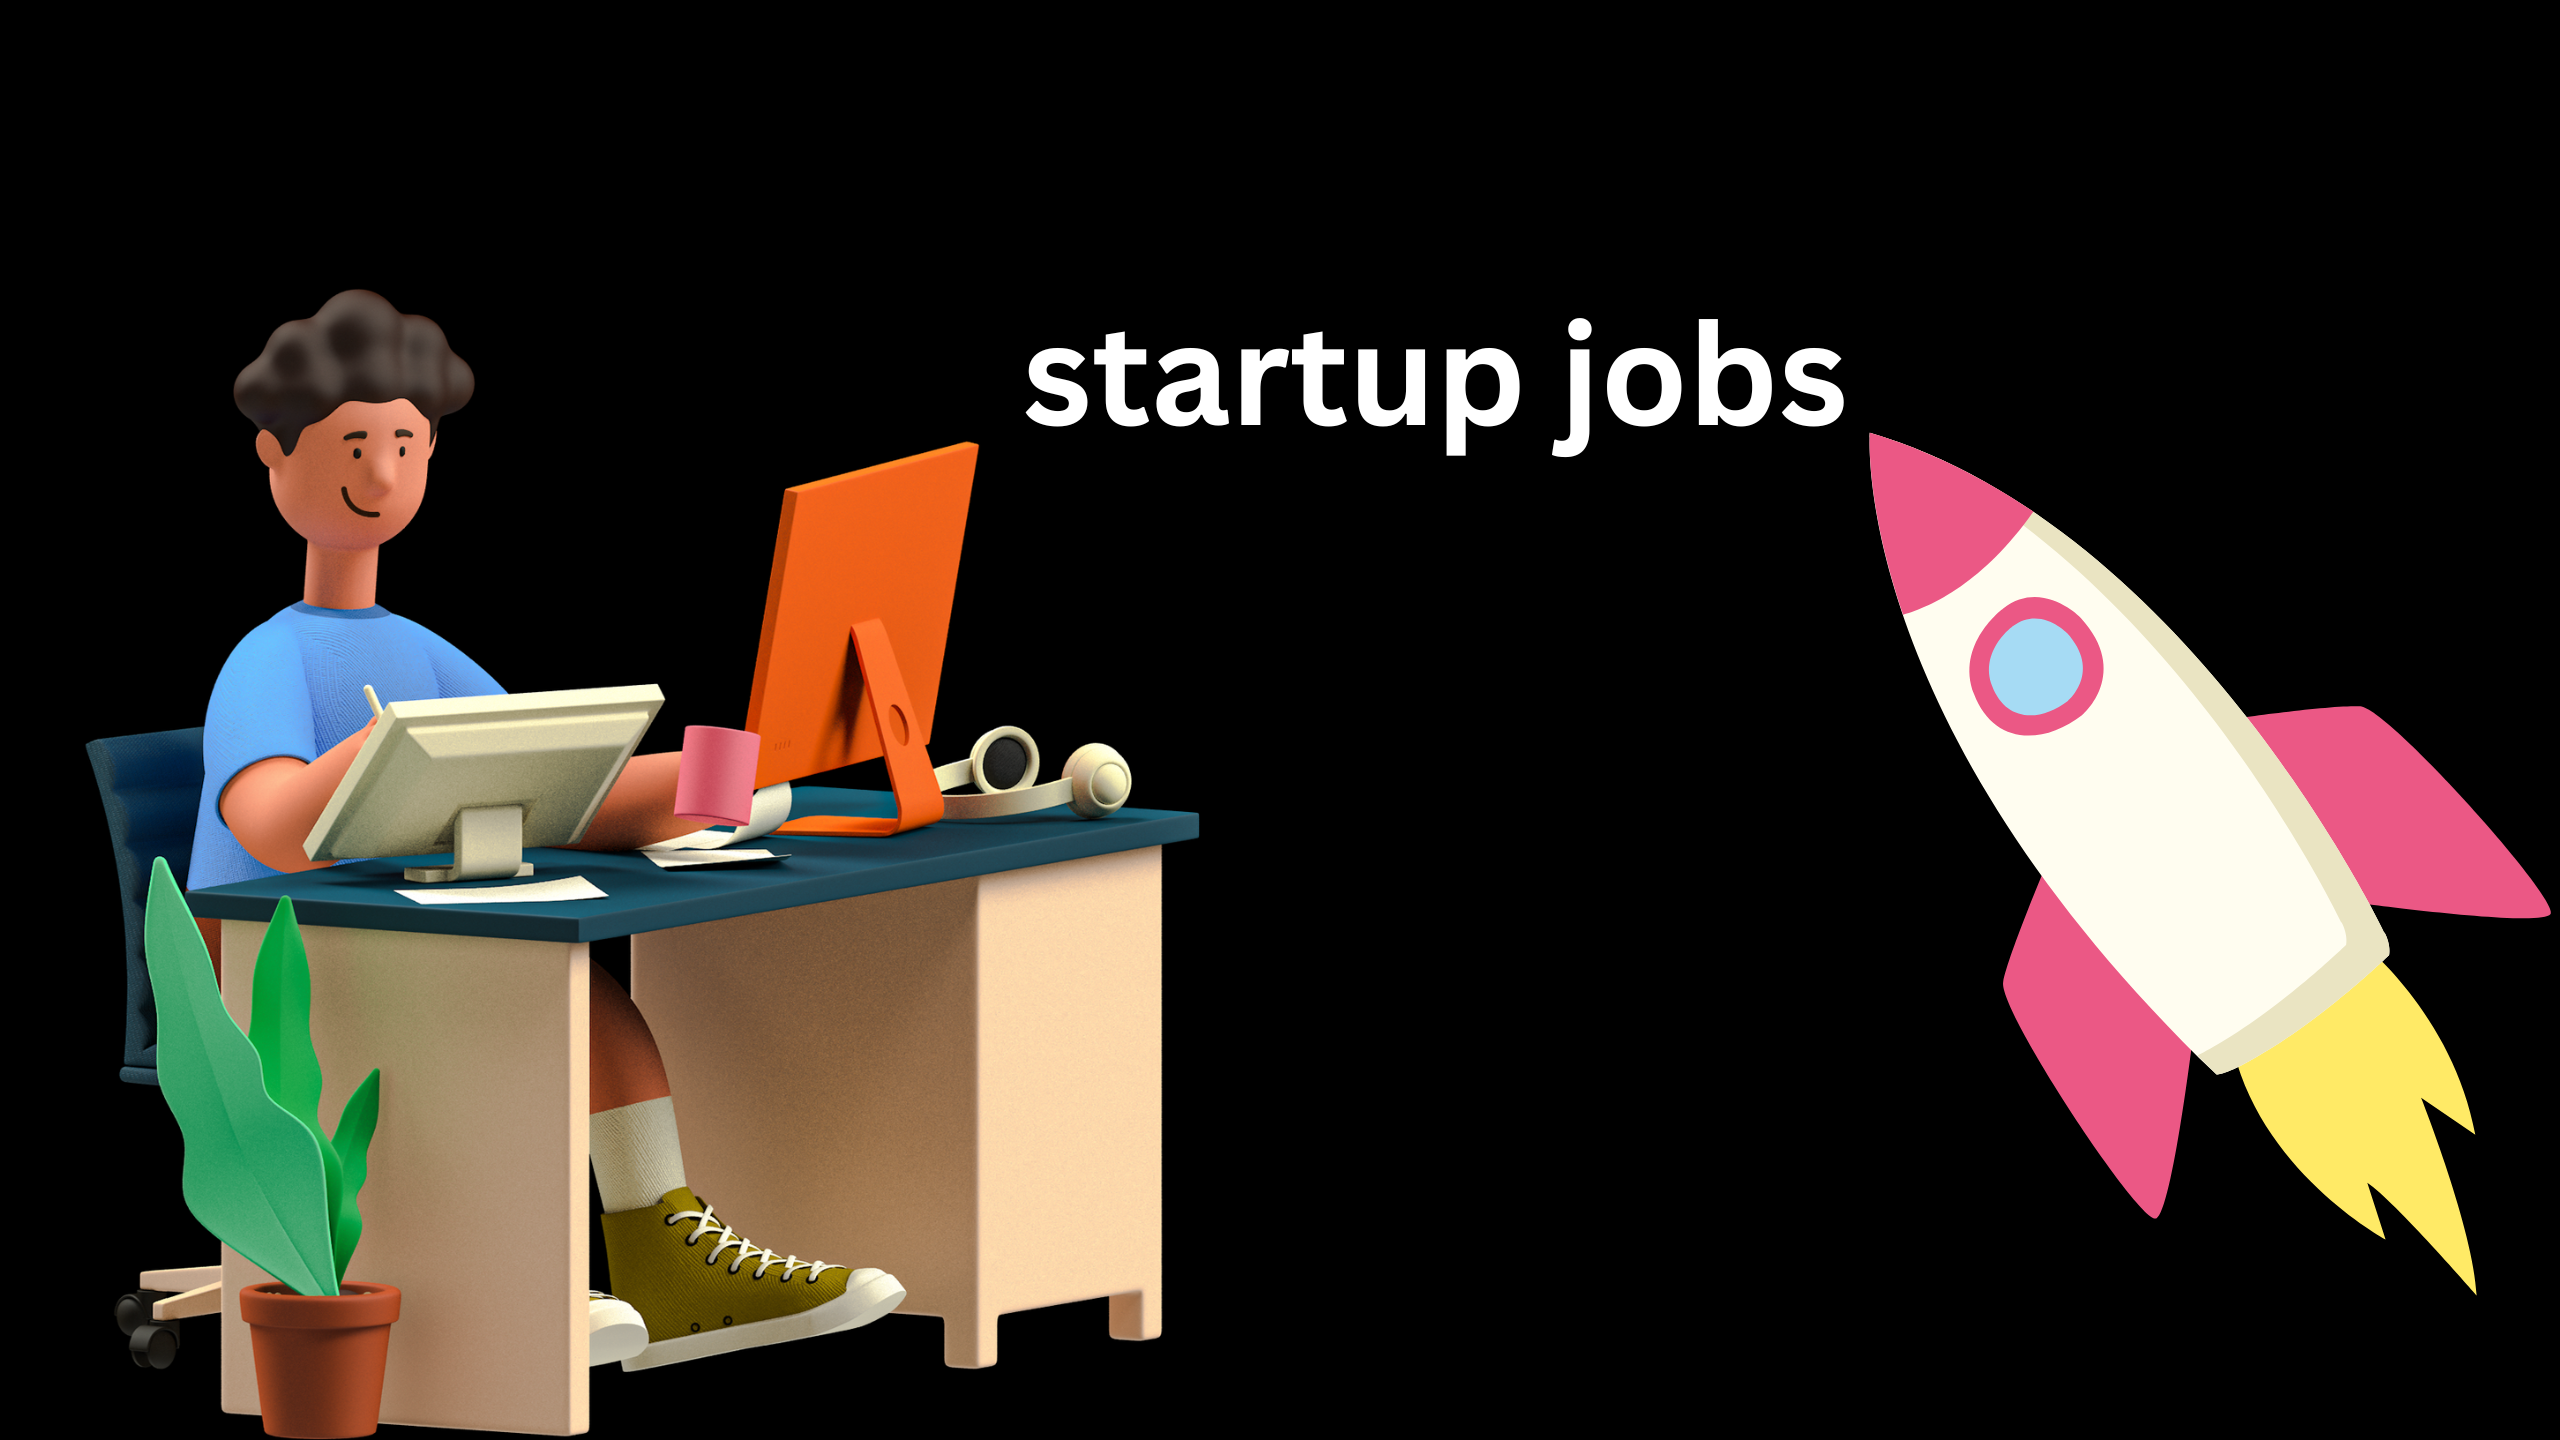 A comprehensive guide to finding startup jobs